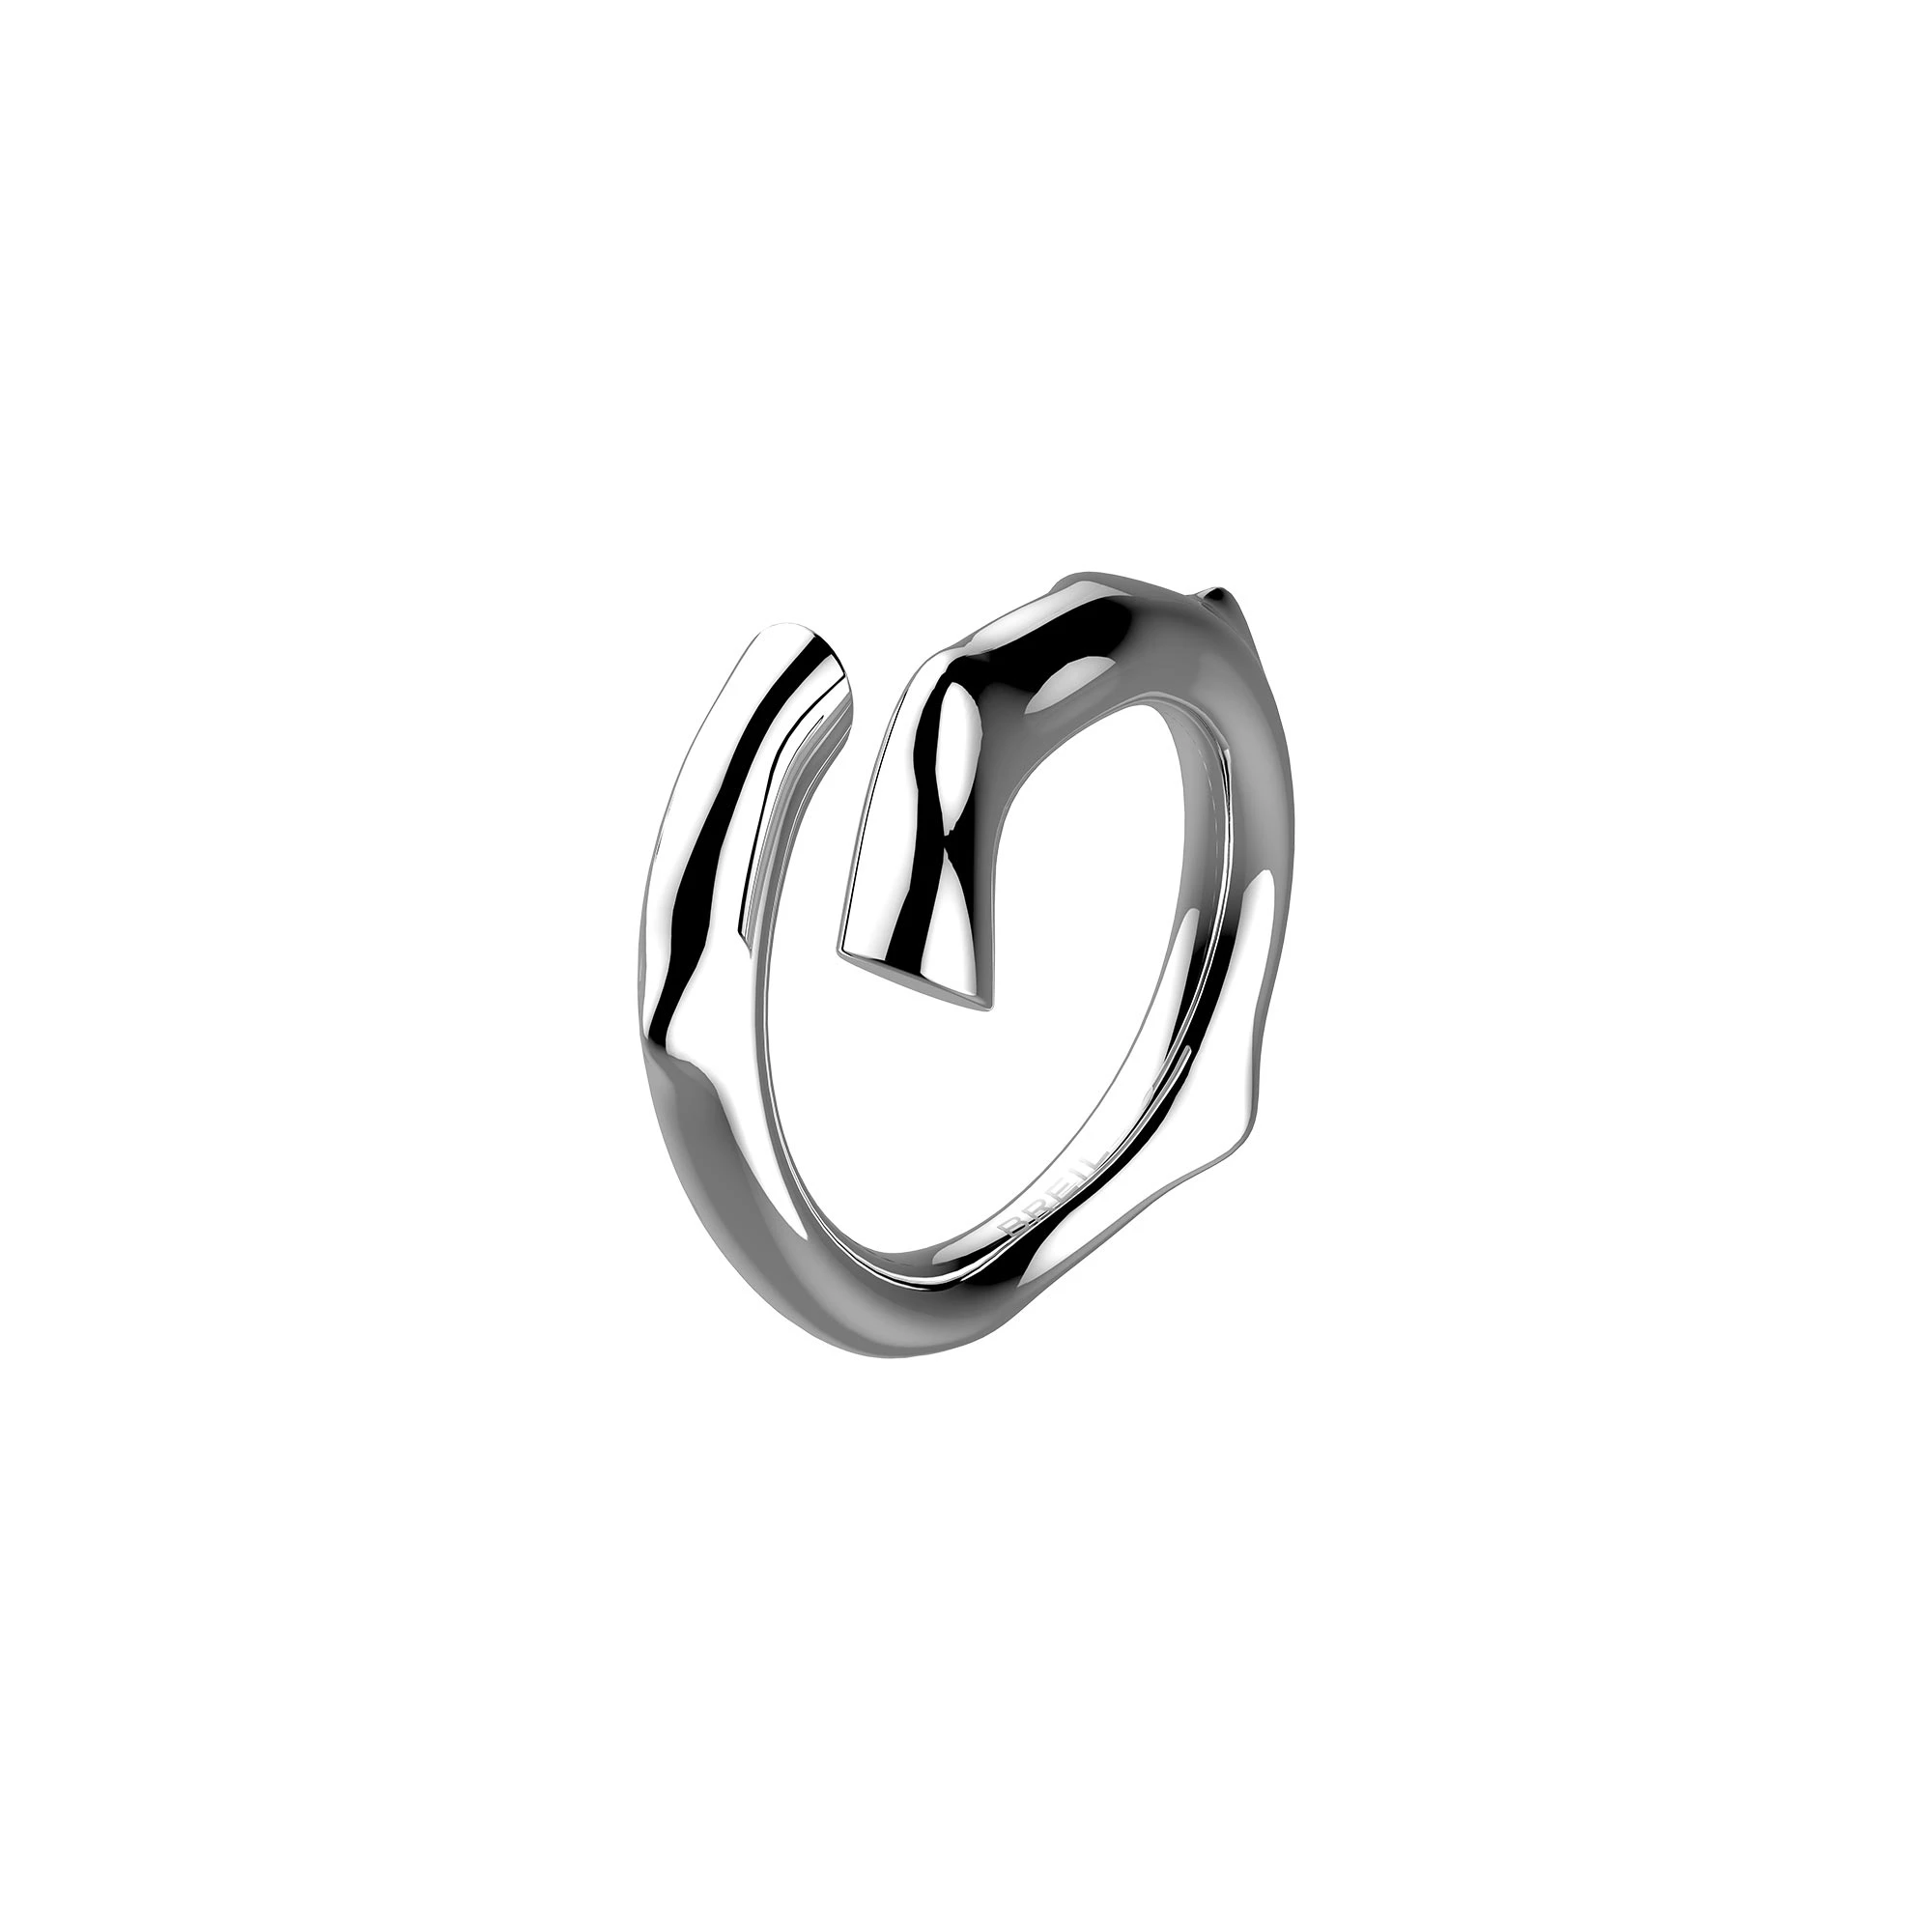 B WITCH - POLISHED STAINLESS STEEL RING - 1 - TJ2752_ | Breil